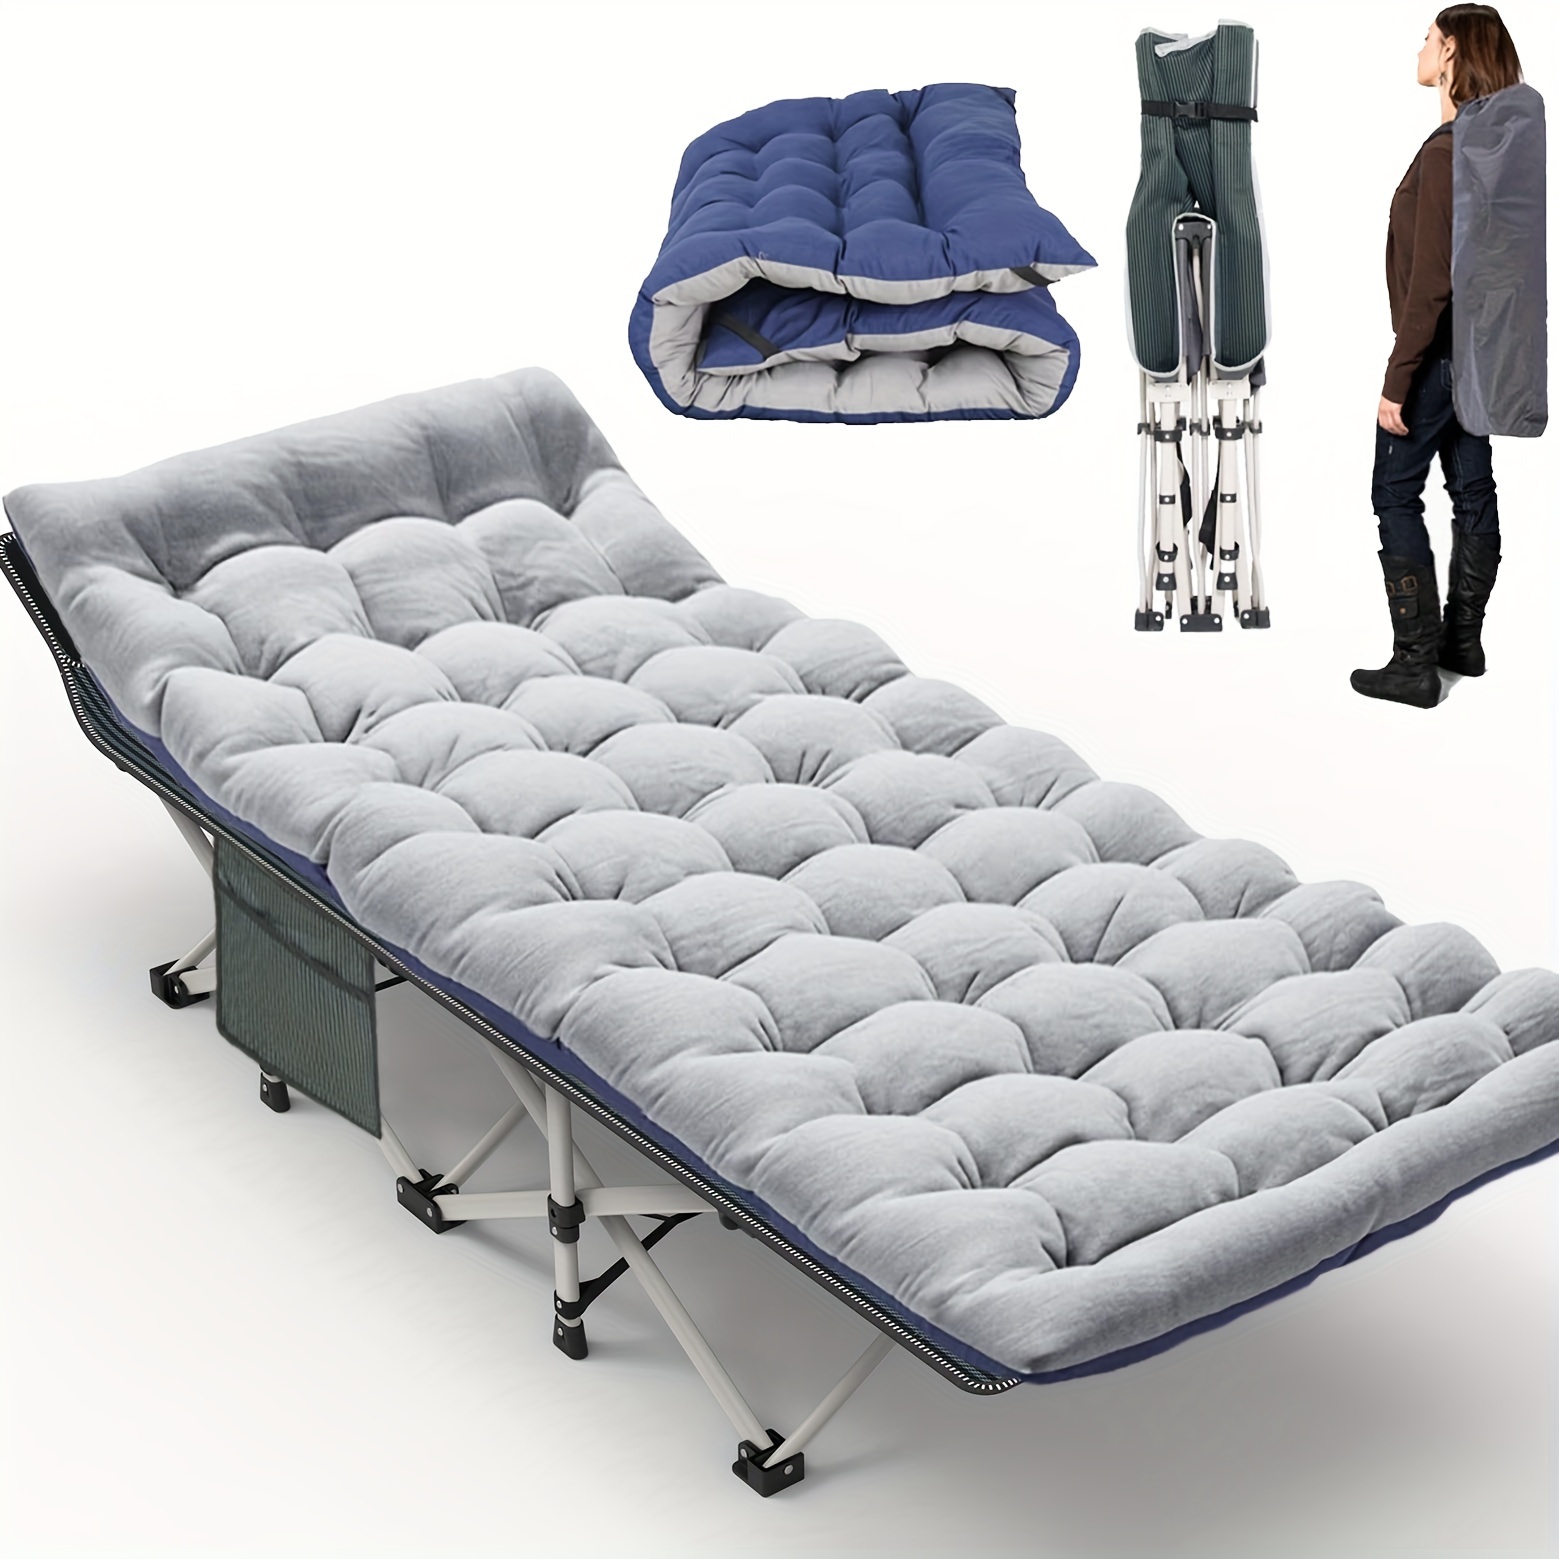 

1pc Folding Bed, Camping Cots With Double-sided Mattress, Portable Foldable Guest Bed, Heavy Duty Sleeping Bed Cot With Carry Bag, Gray&blue